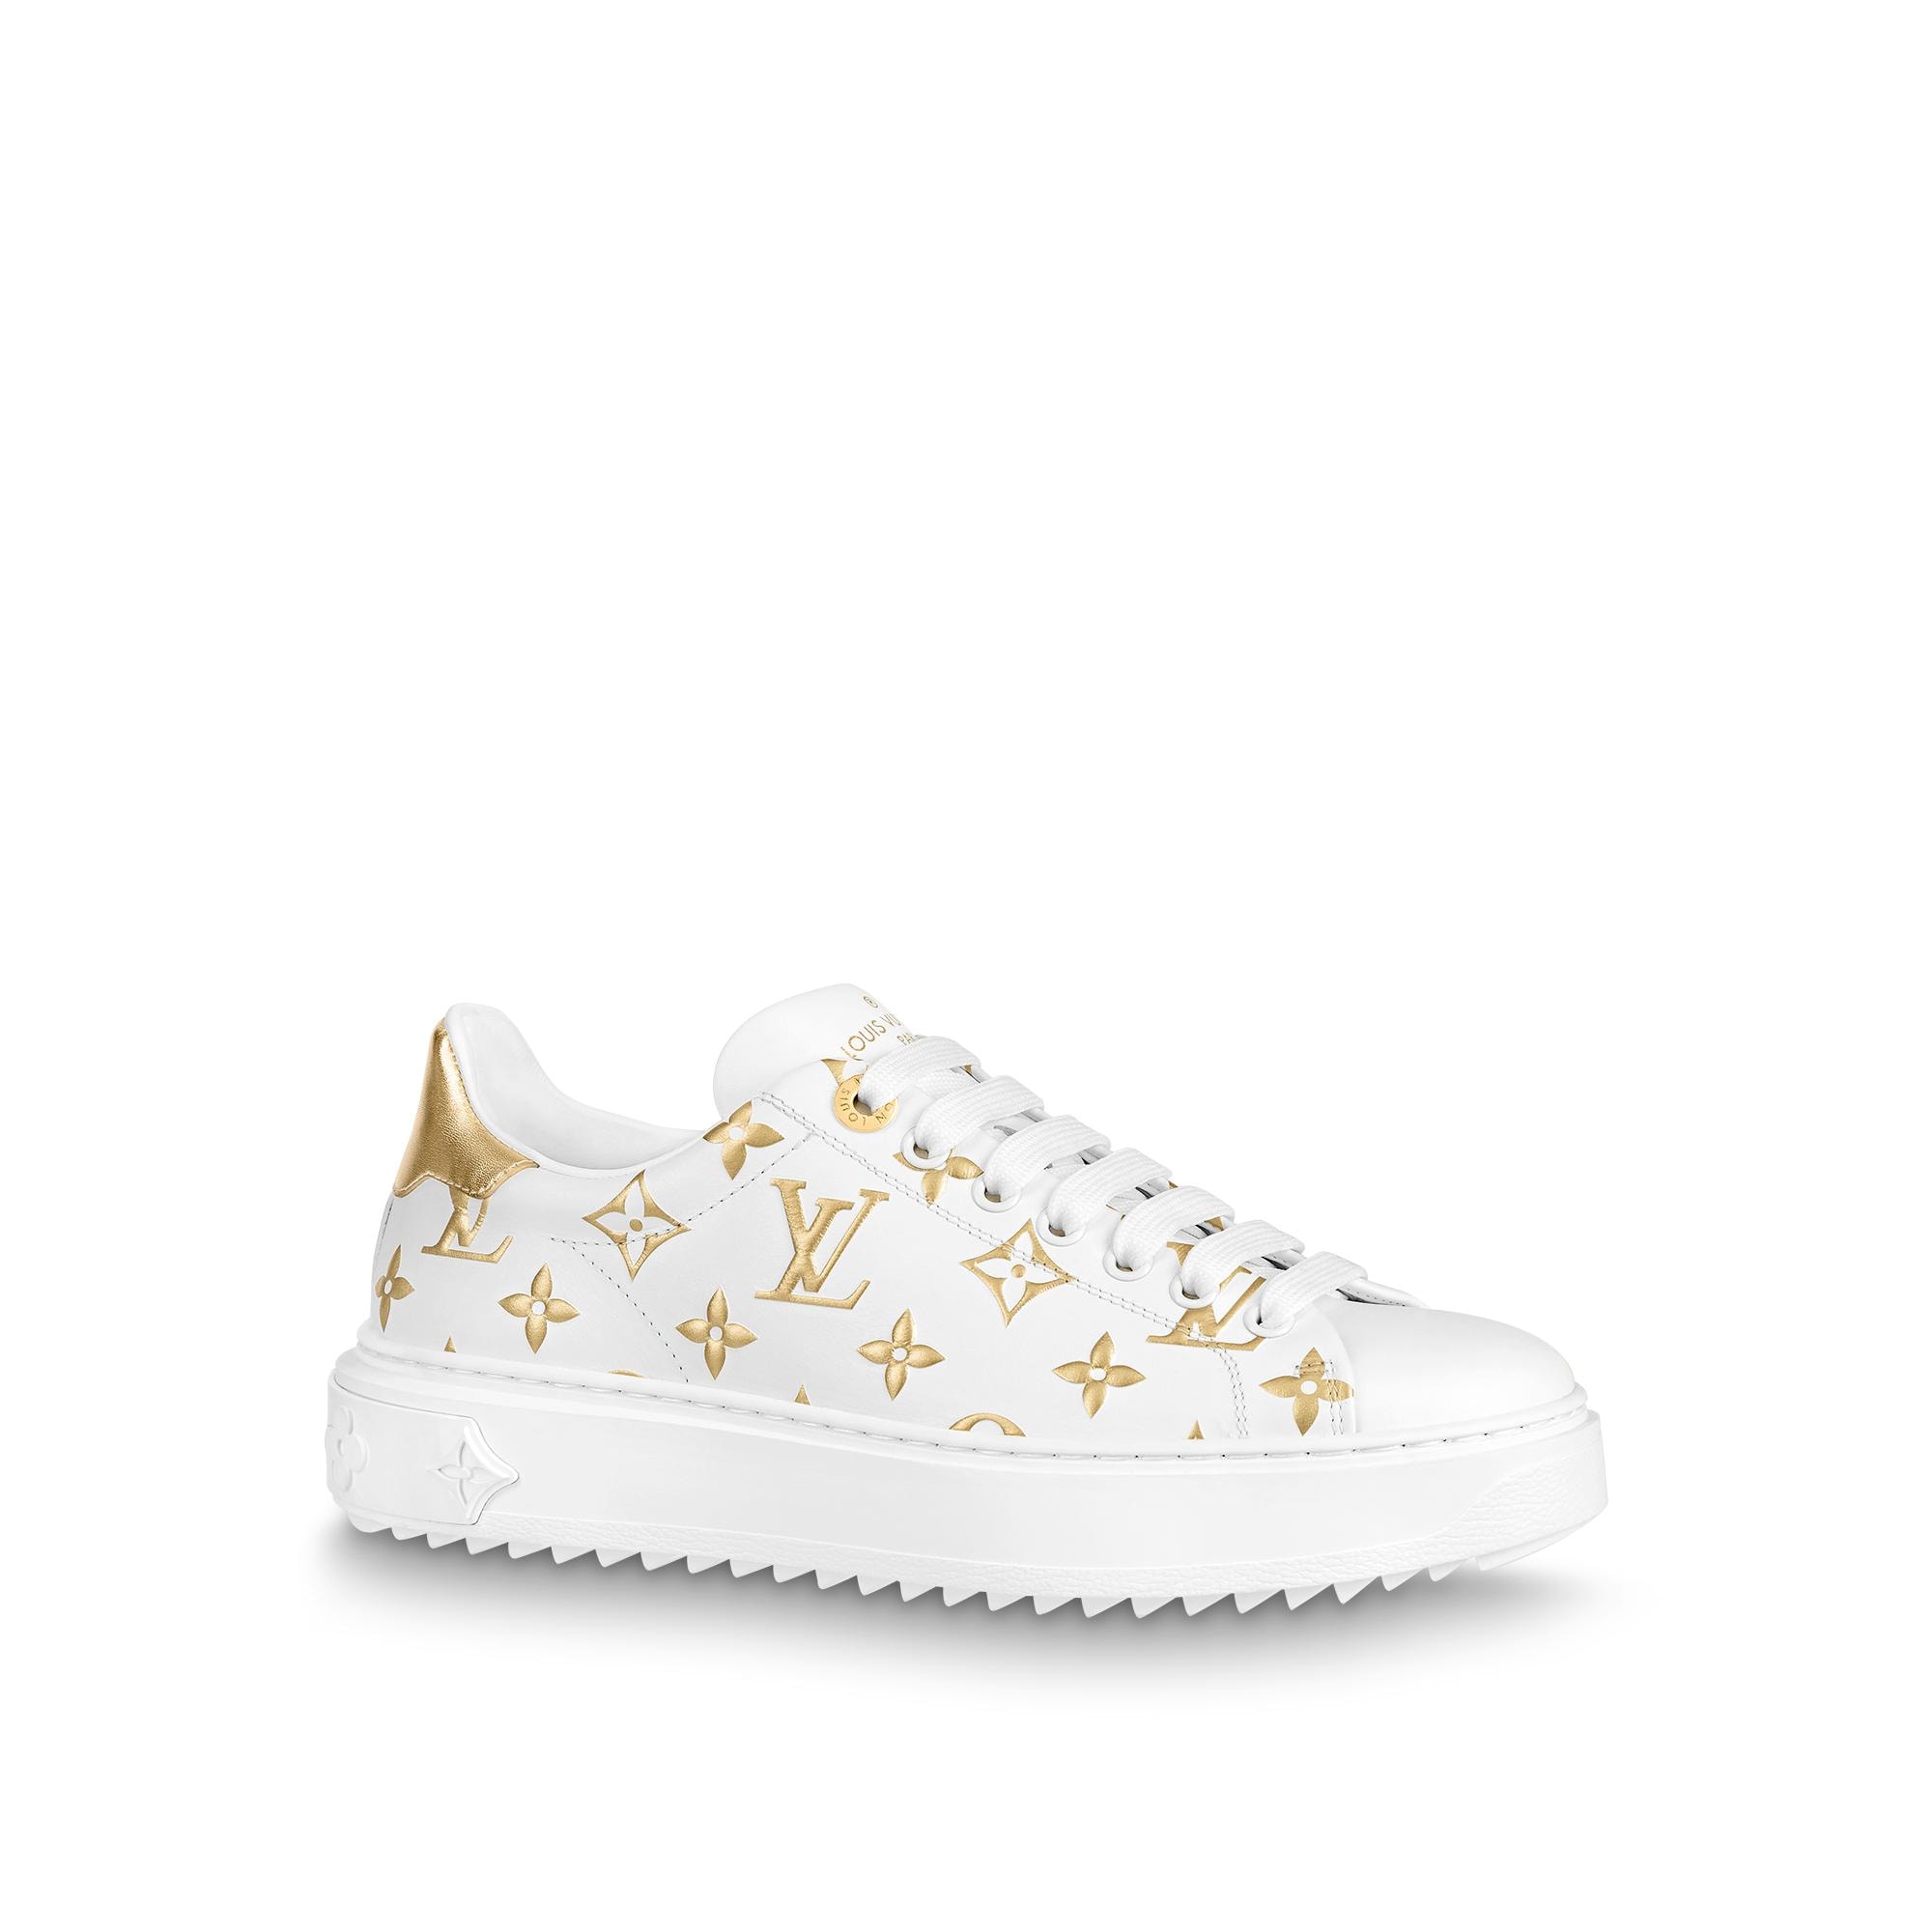 Louis Vuitton Aftergame Sneaker in Gold - Women Shoes 1A8NDN - $131.30 